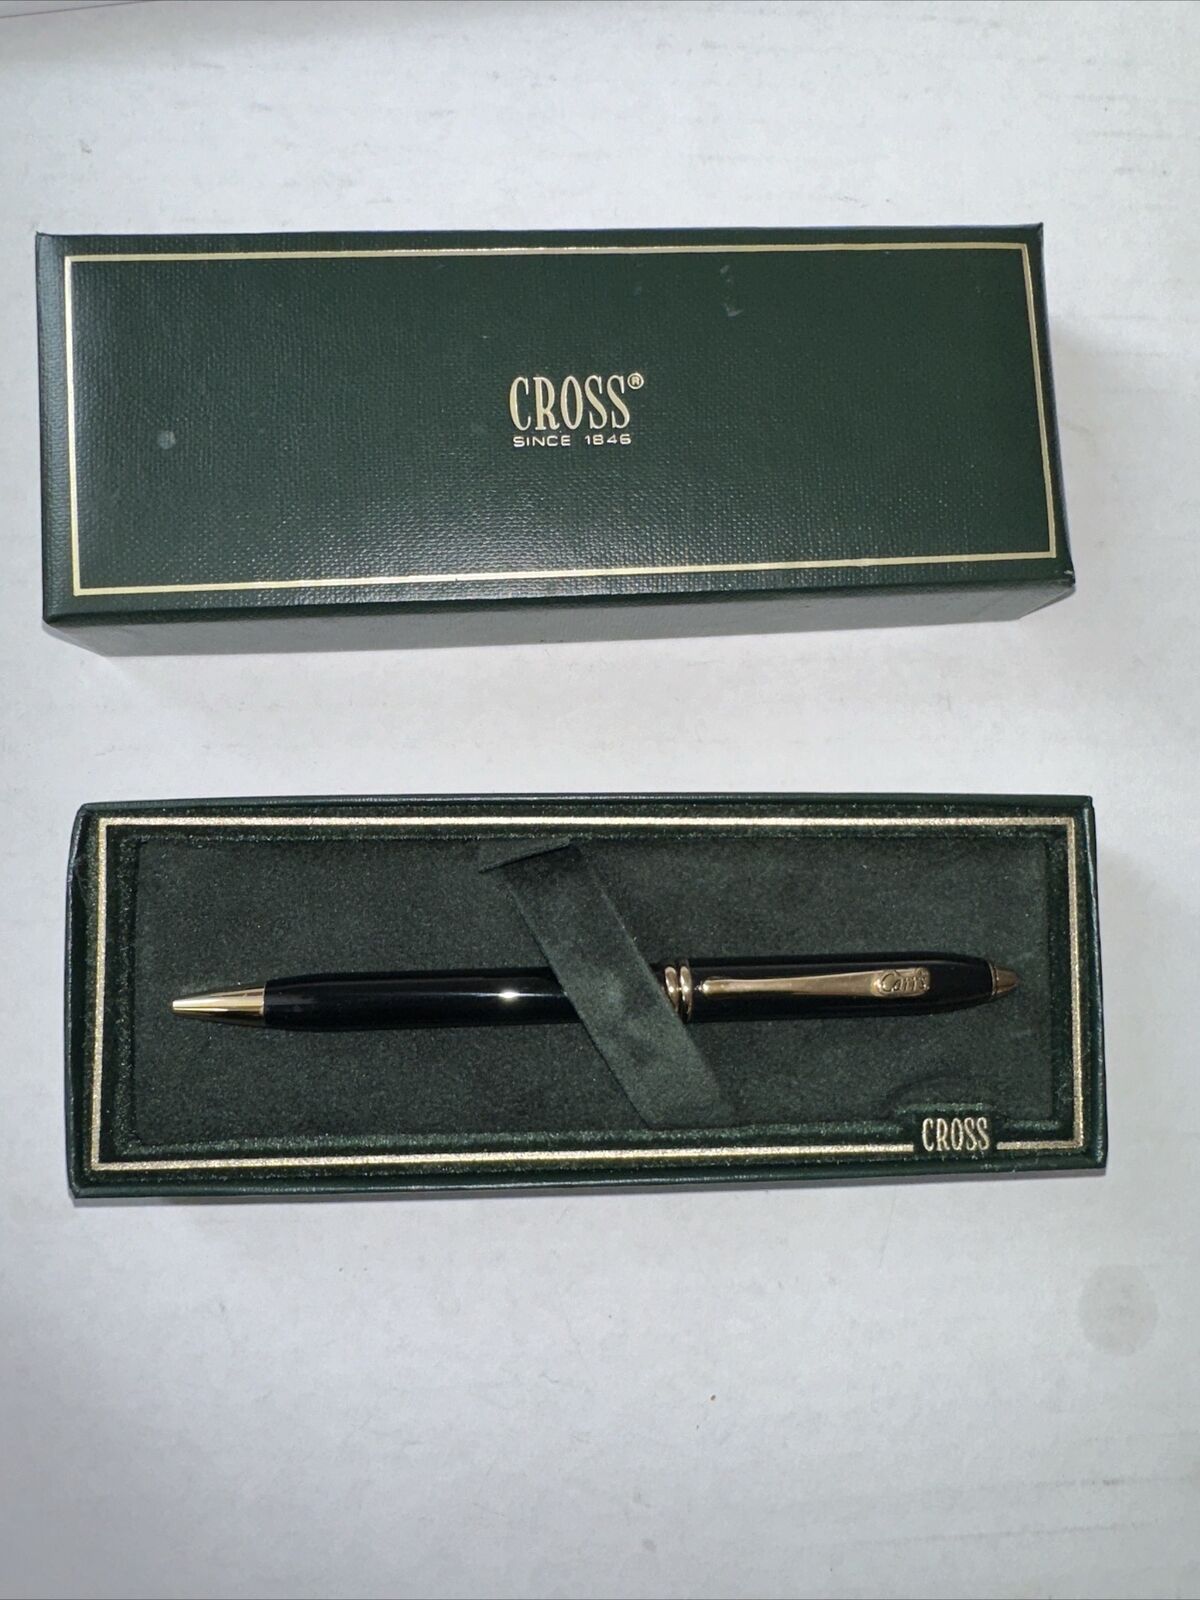 Cross Townsend Black Lacquer & Gold Pen 572 - Carr’s Crackers READ BELOW